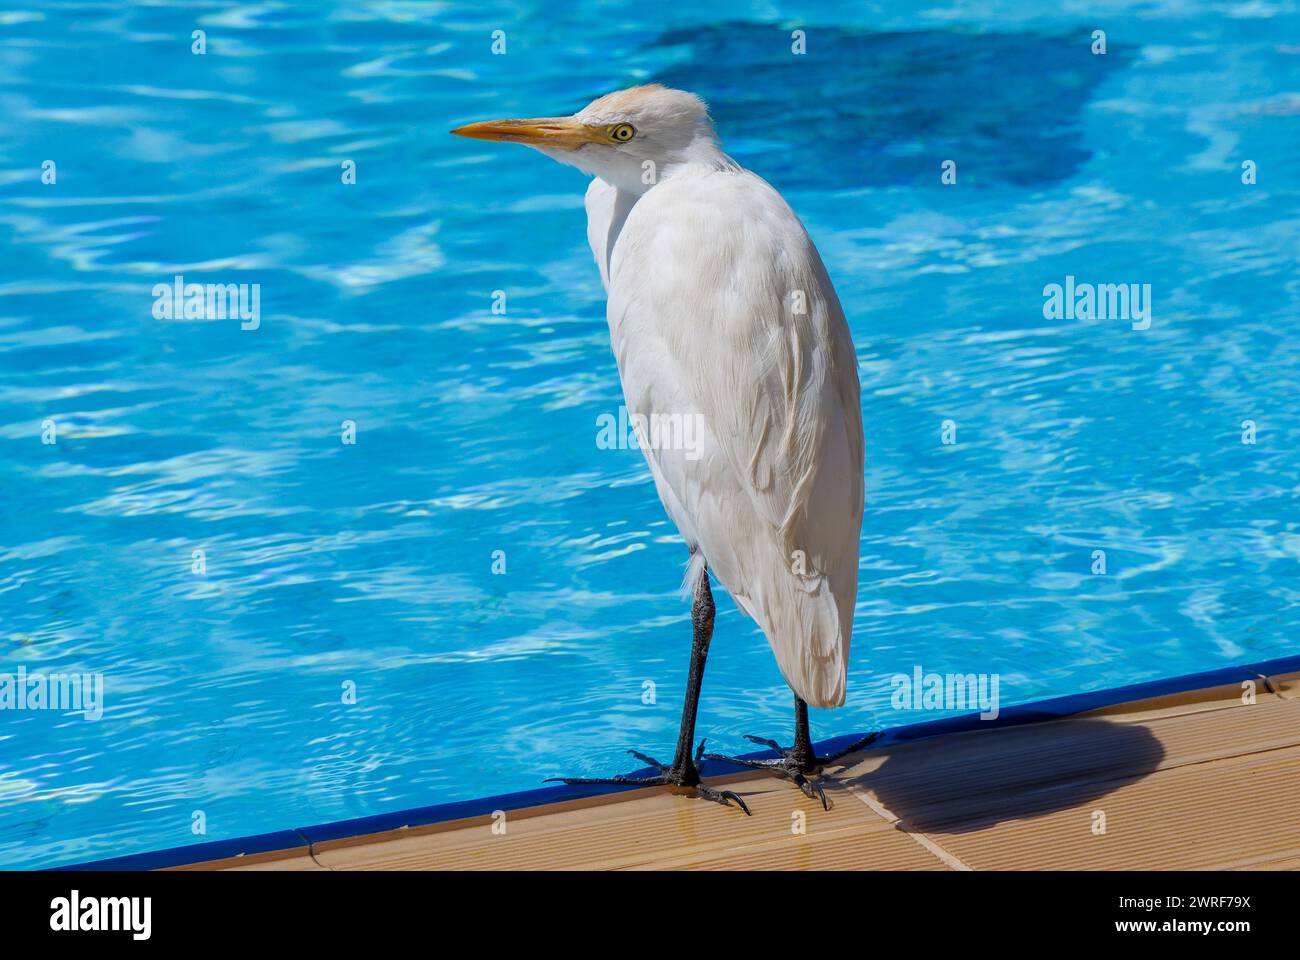 The cattle egret (Bubulcus), a genus of heron (family Ardeidae), stands by a swimming pool in Egypt. Stock Photo